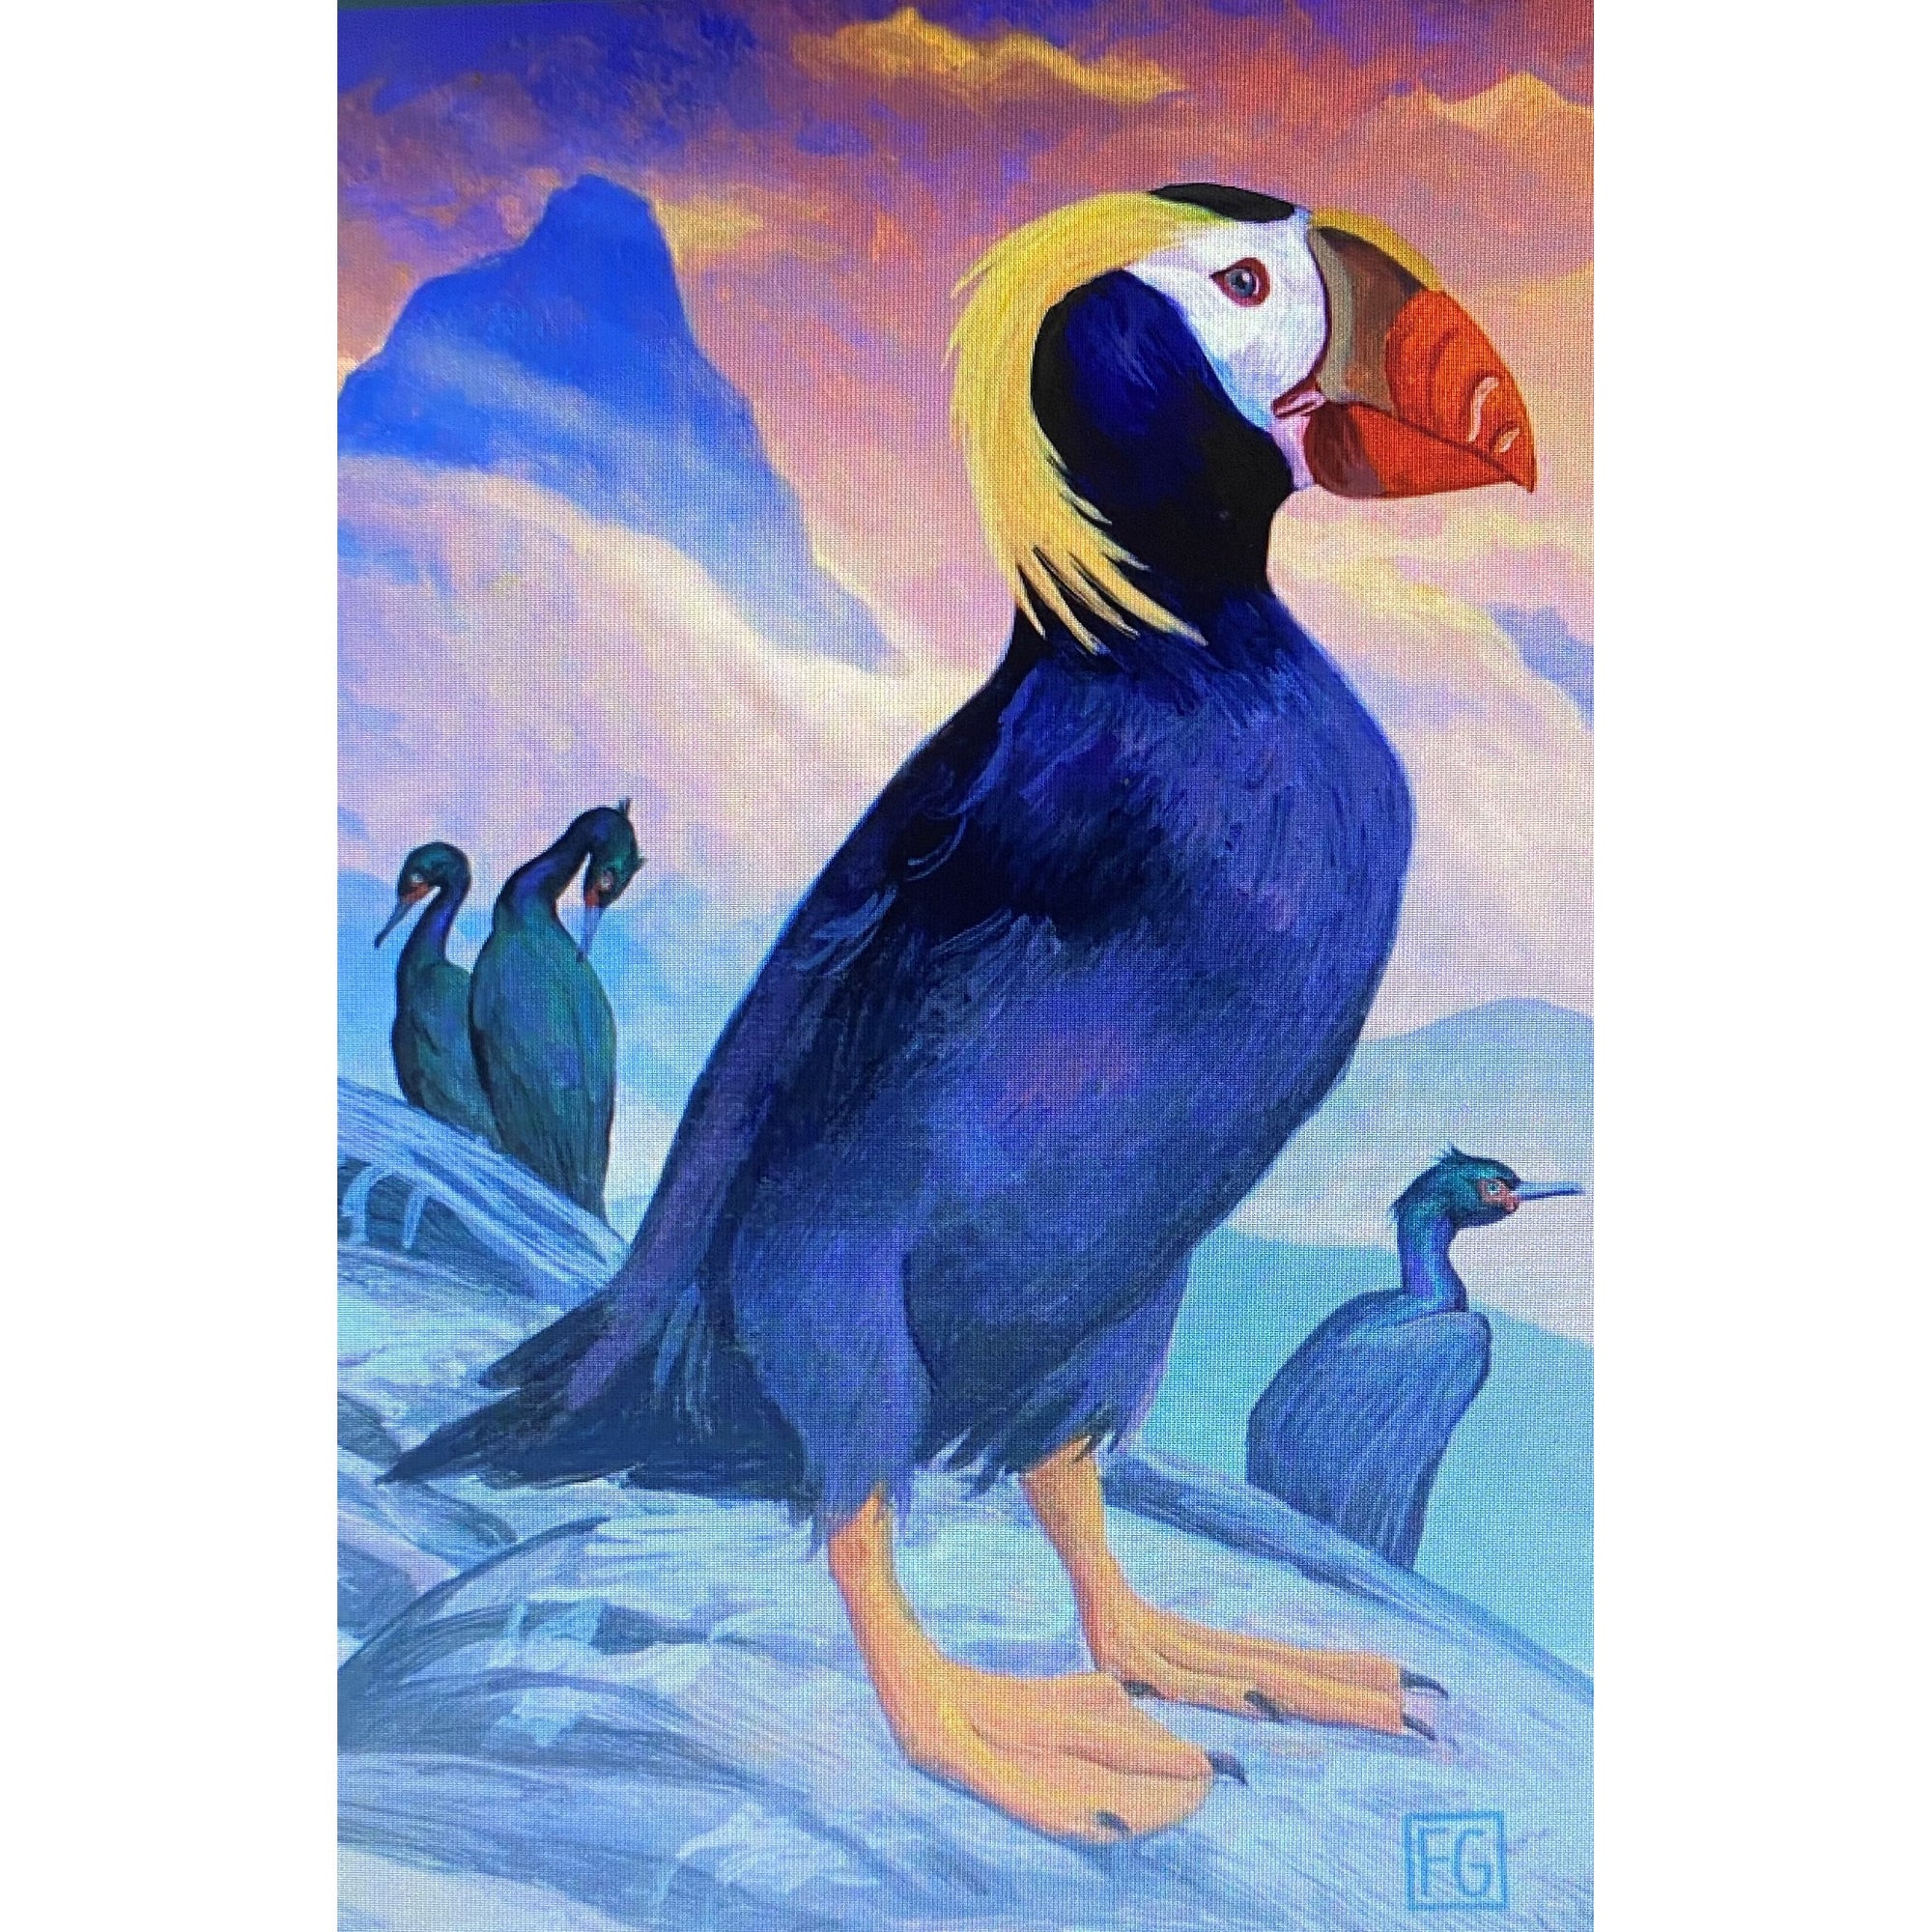 Tufted Puffin - Wood Block 3.5x3.5 by Artist Francois Girard